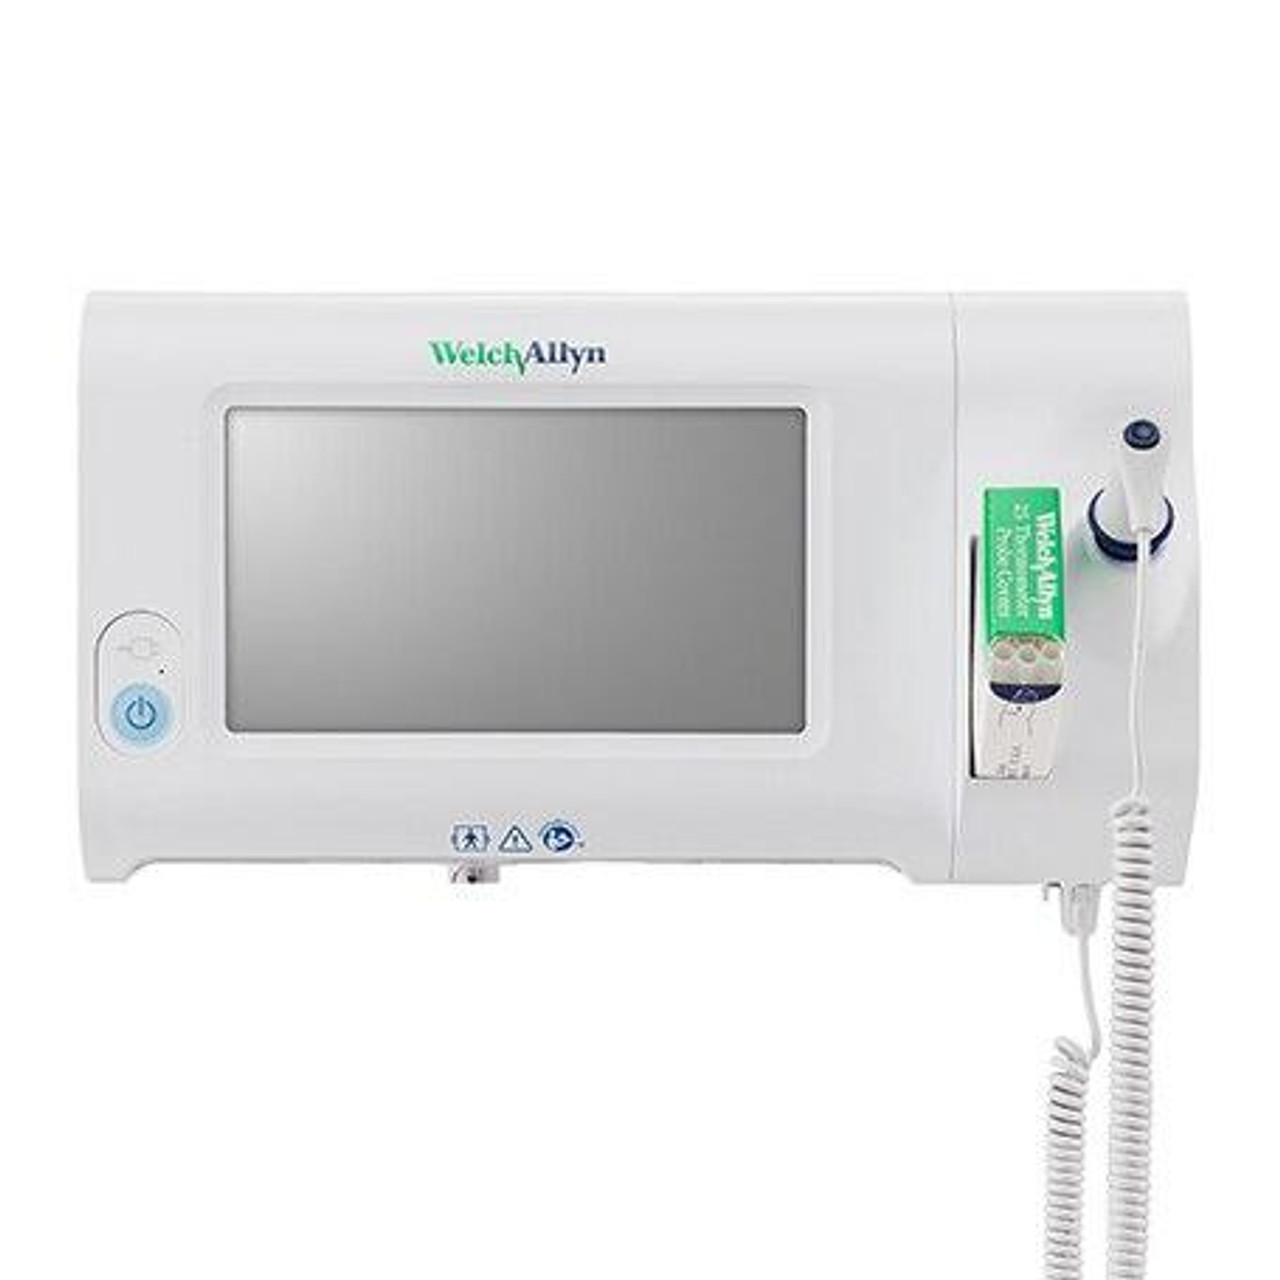 Vital With Sign Welch Suretemp SureBP Connex Spot And D Monitor Plus - Allyn Thermometer